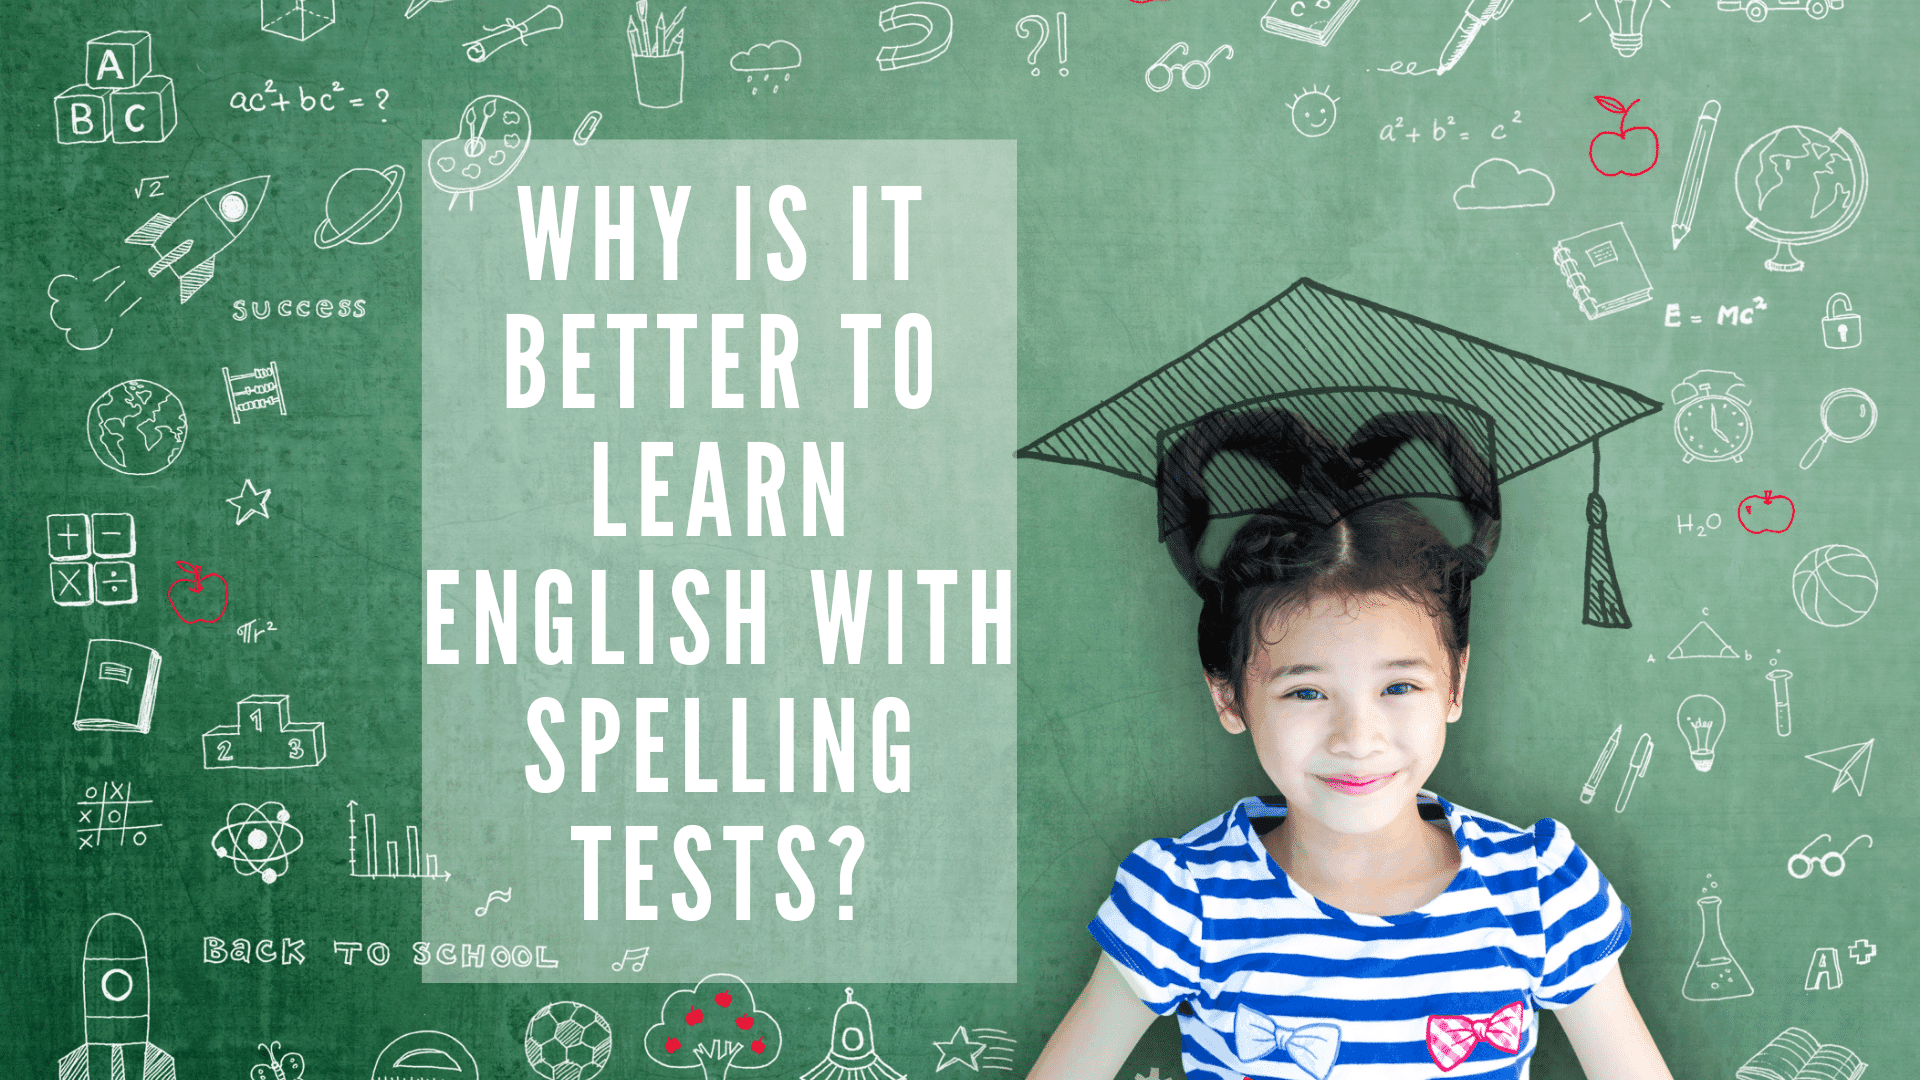 While trying to learn the English language, which learning activity should get the highest priority? Grammar, speaking skills, or maybe listening skills? What if I tell you that the BEST possible method of learning English is spelling tests?